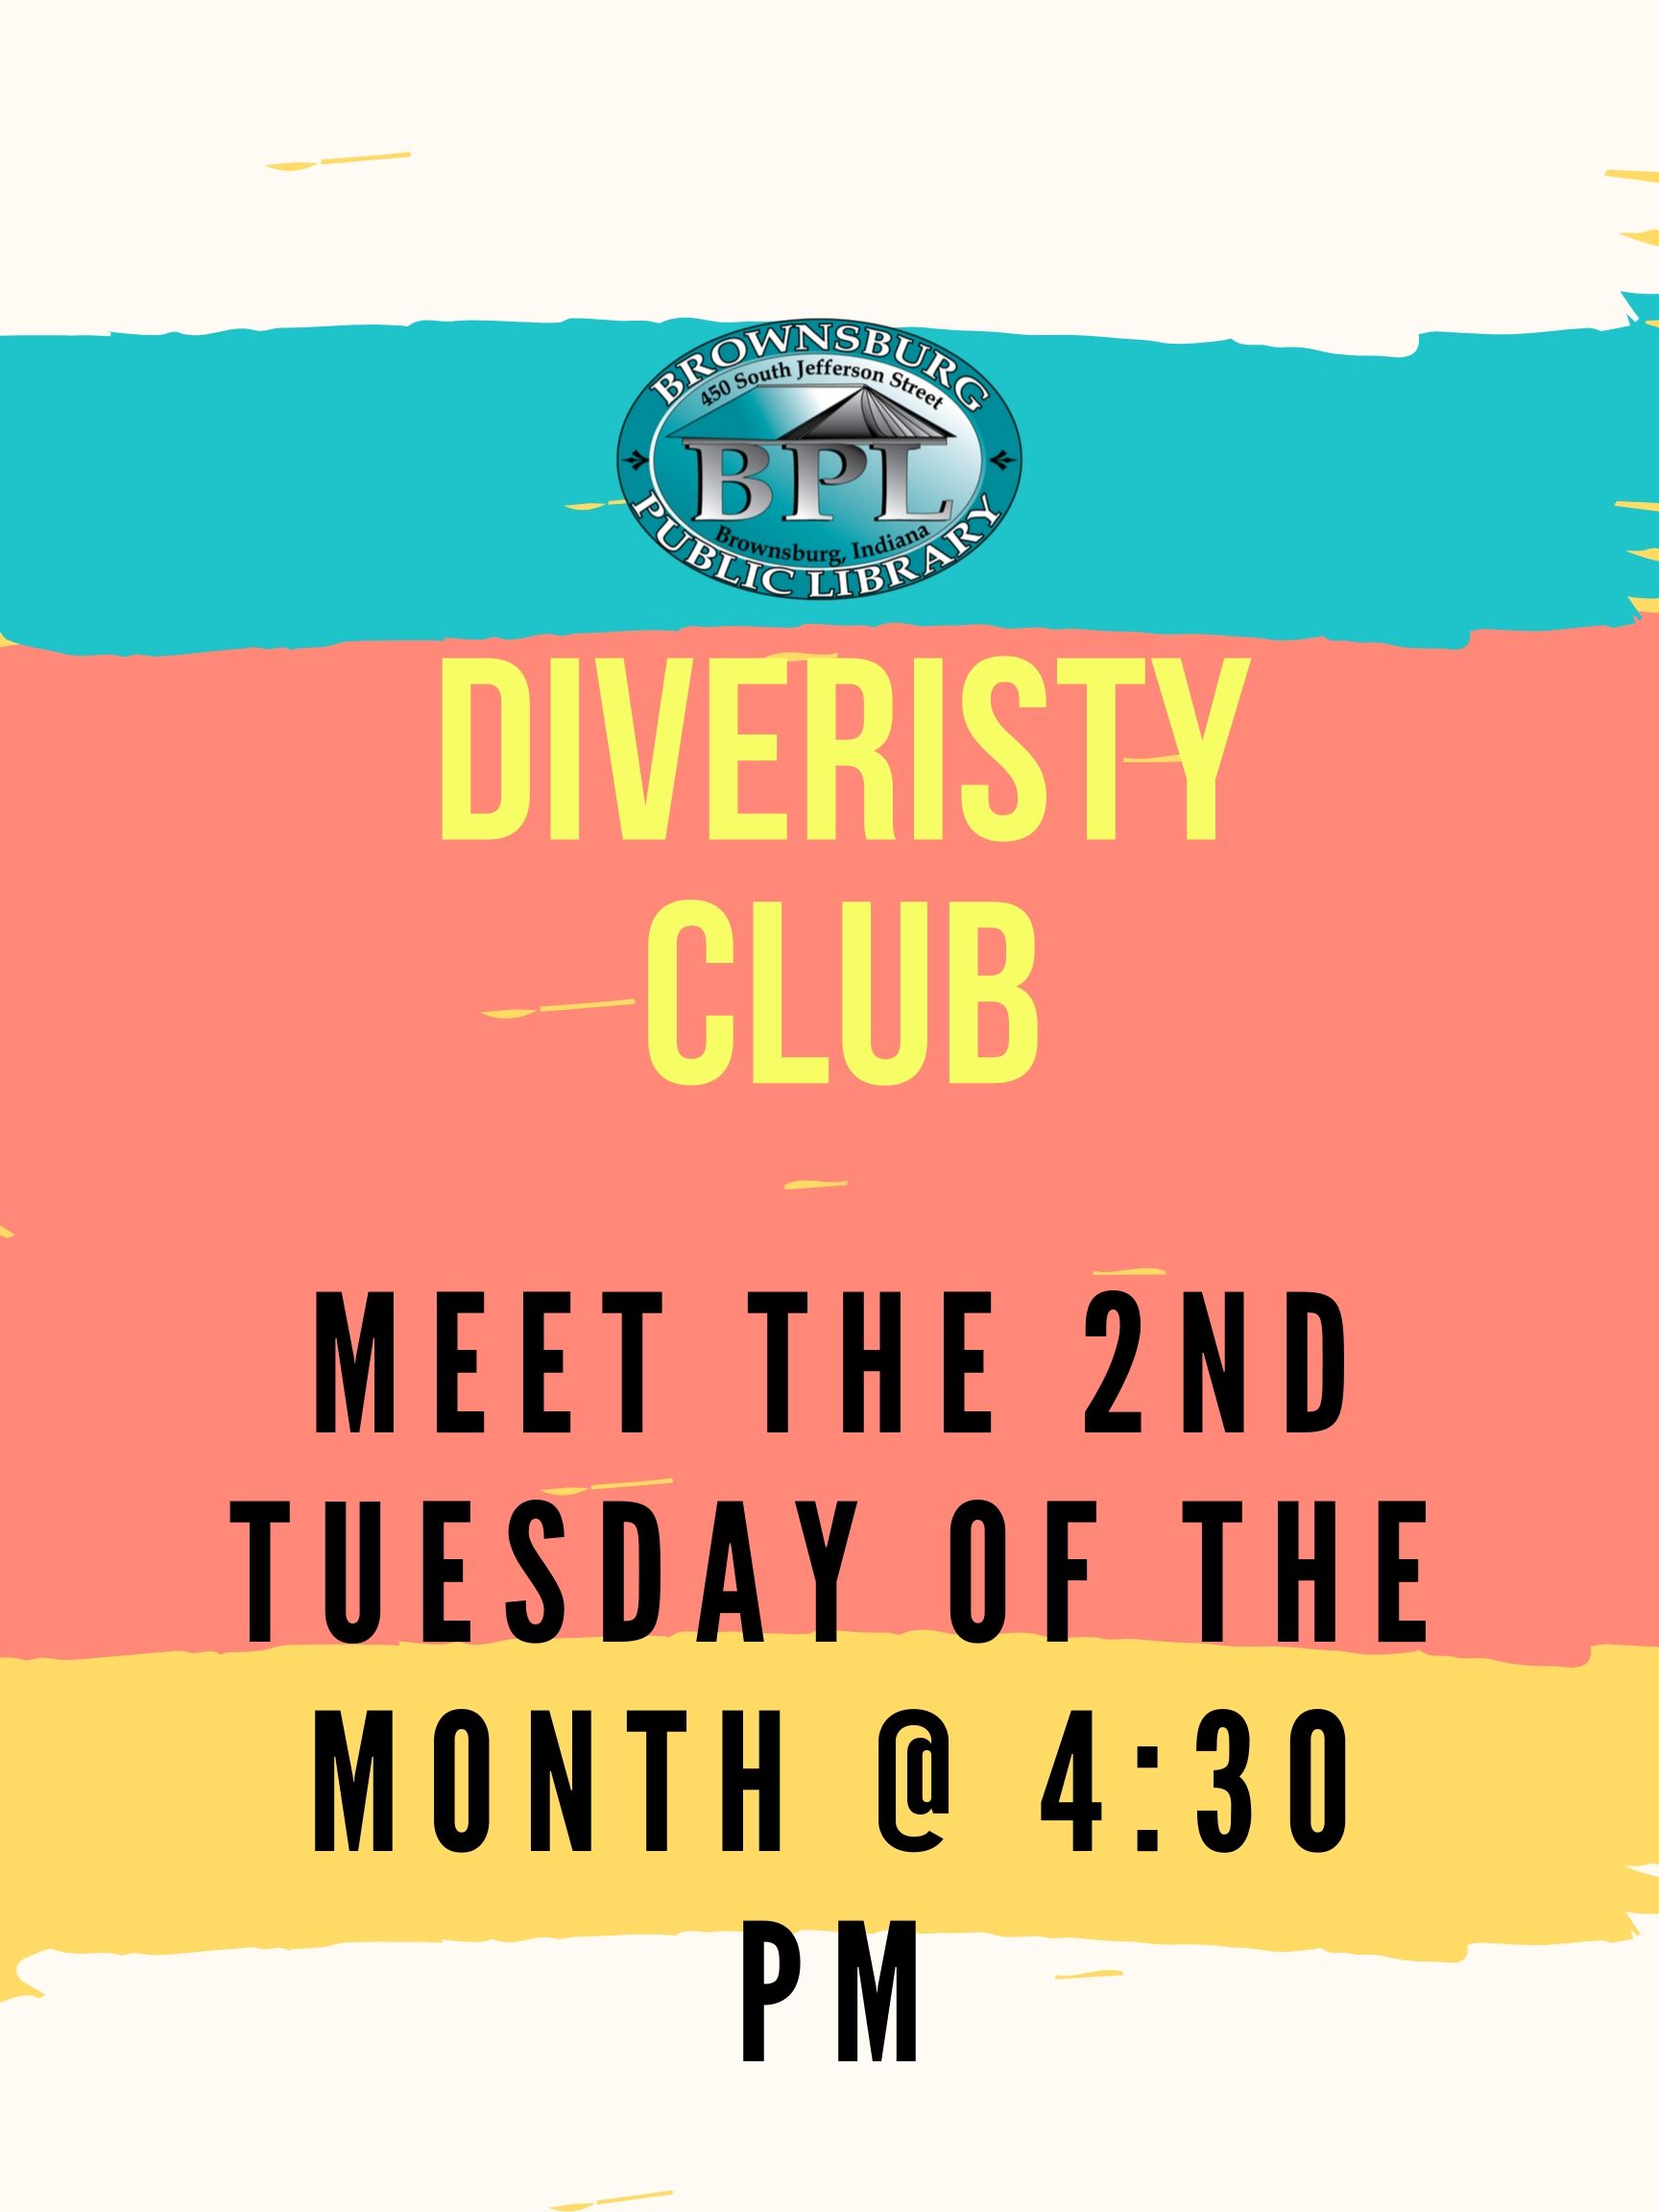 Diversity Club meet 2nd Tuesday of the month at 4:30